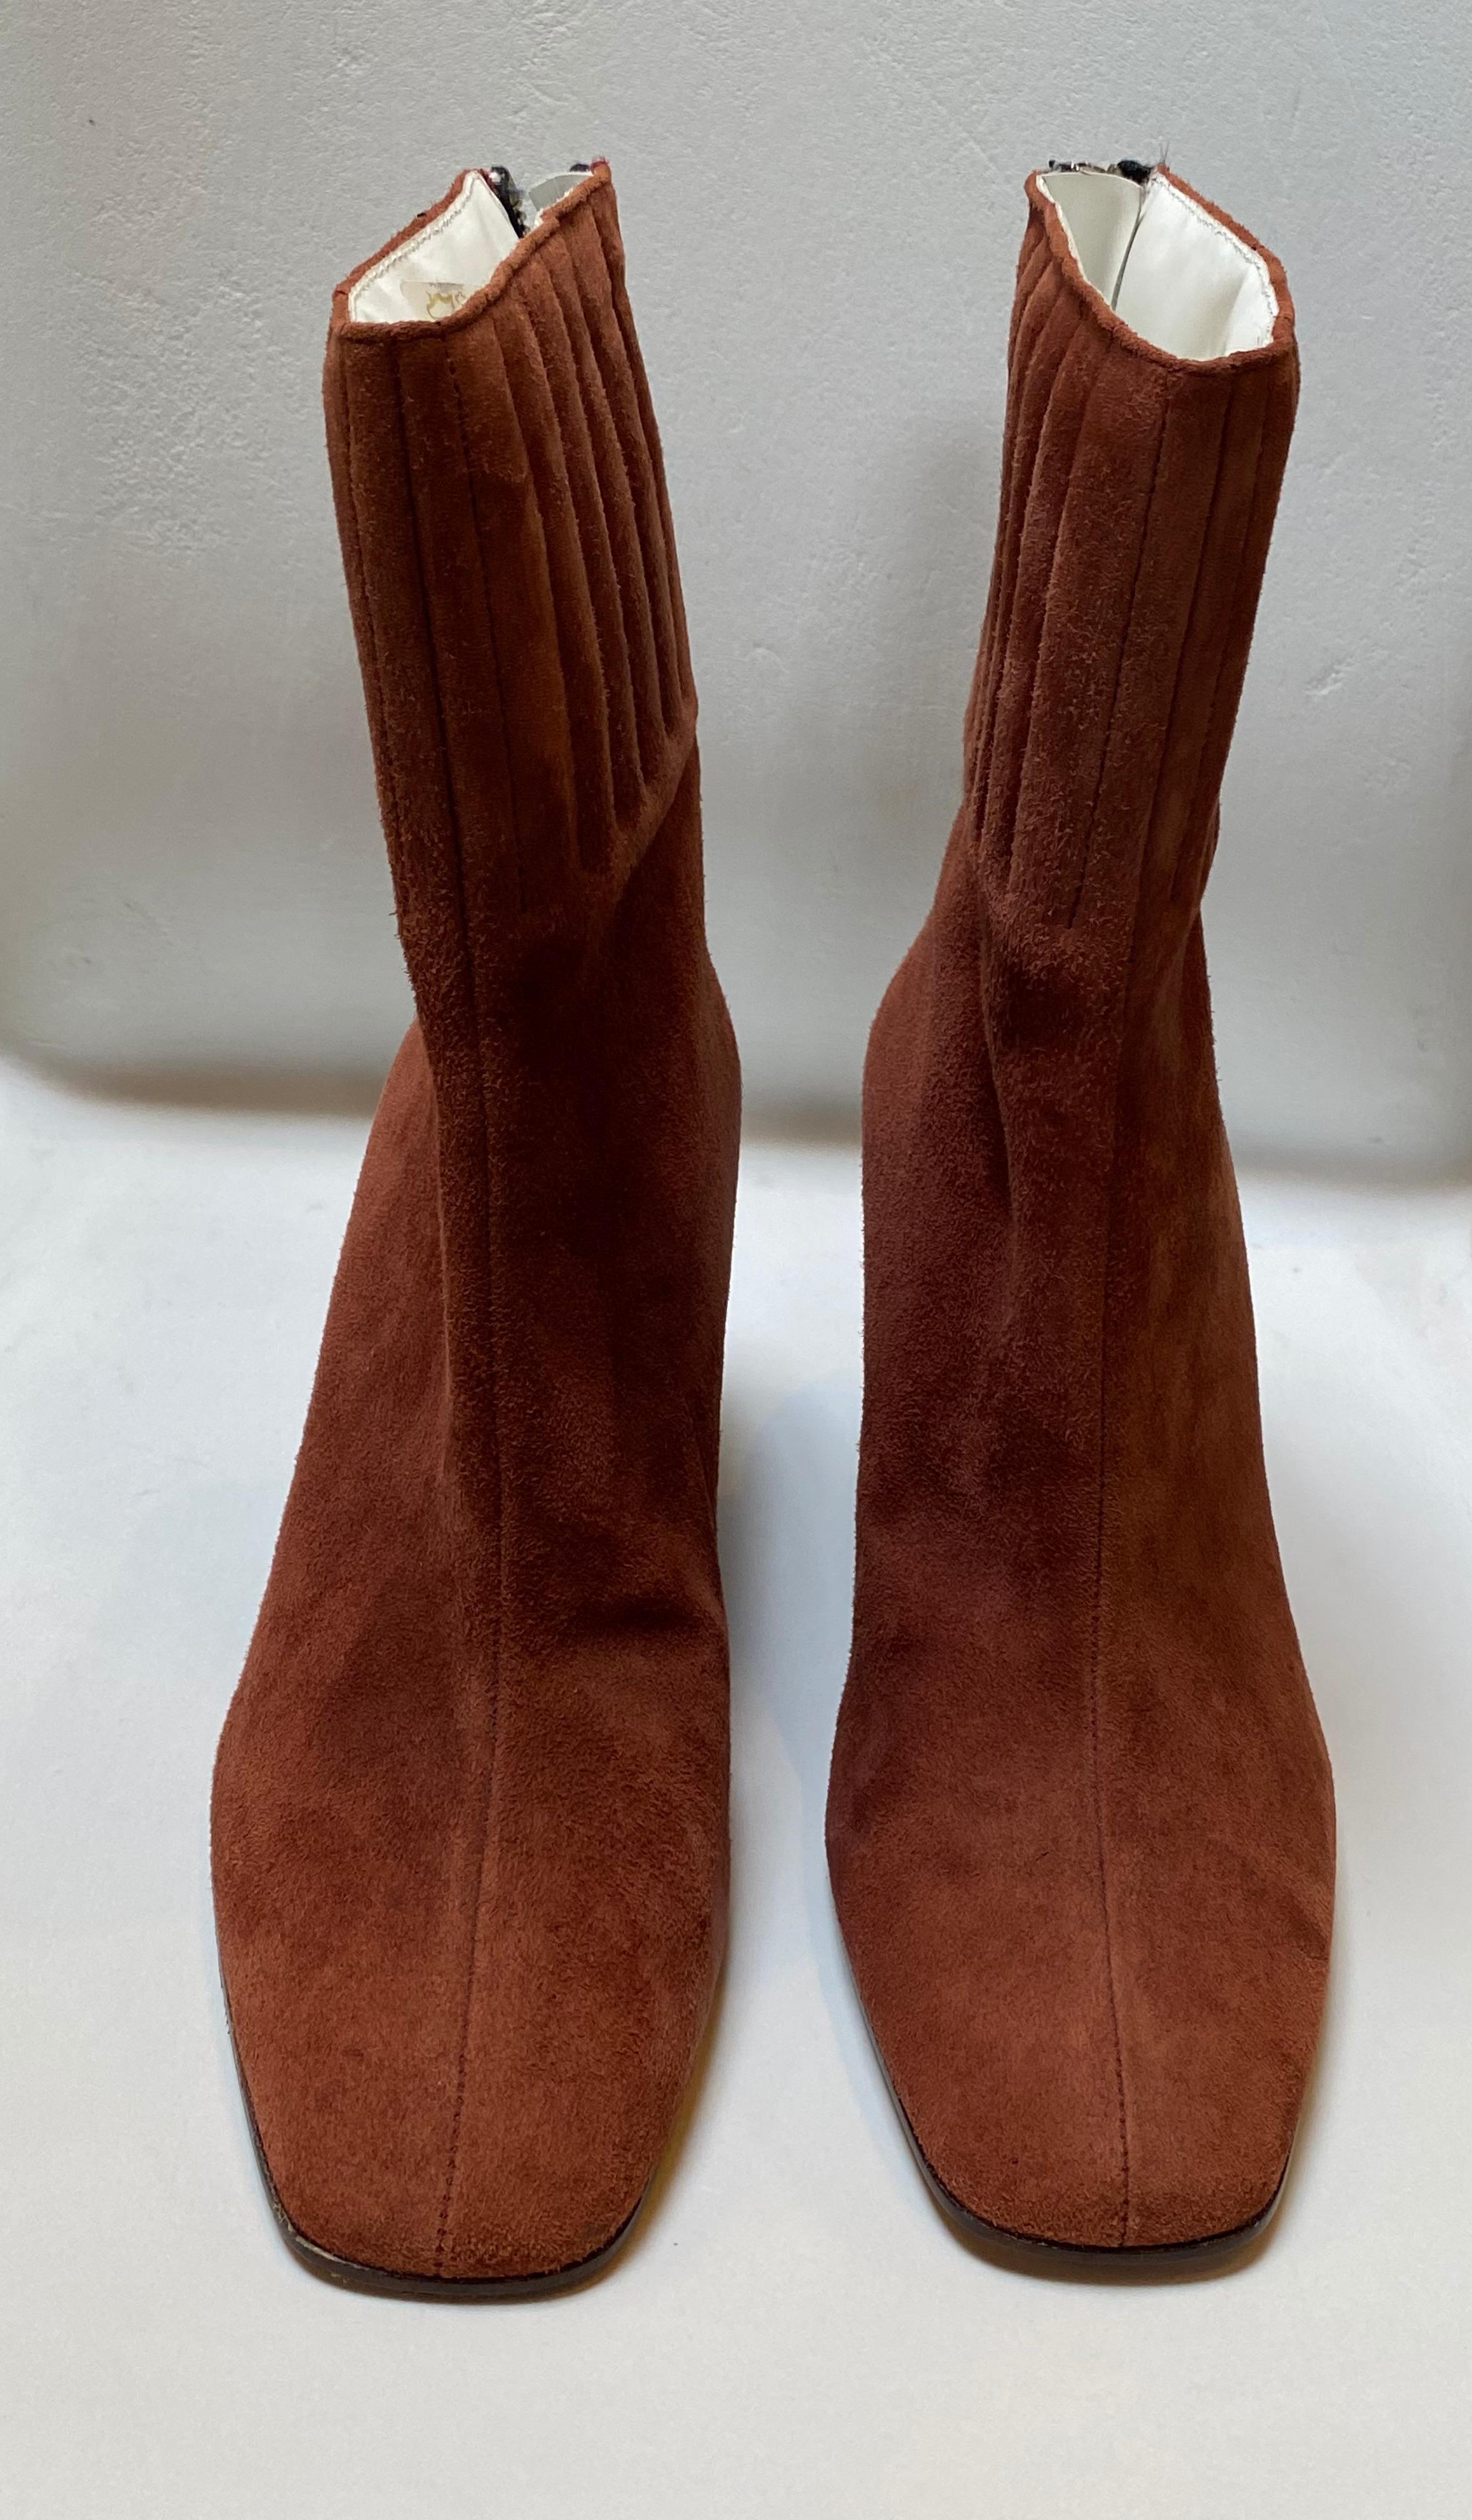 Vintage Courreges prune-colored suede ankle boot with back zipper and clear plexi wedge heel.